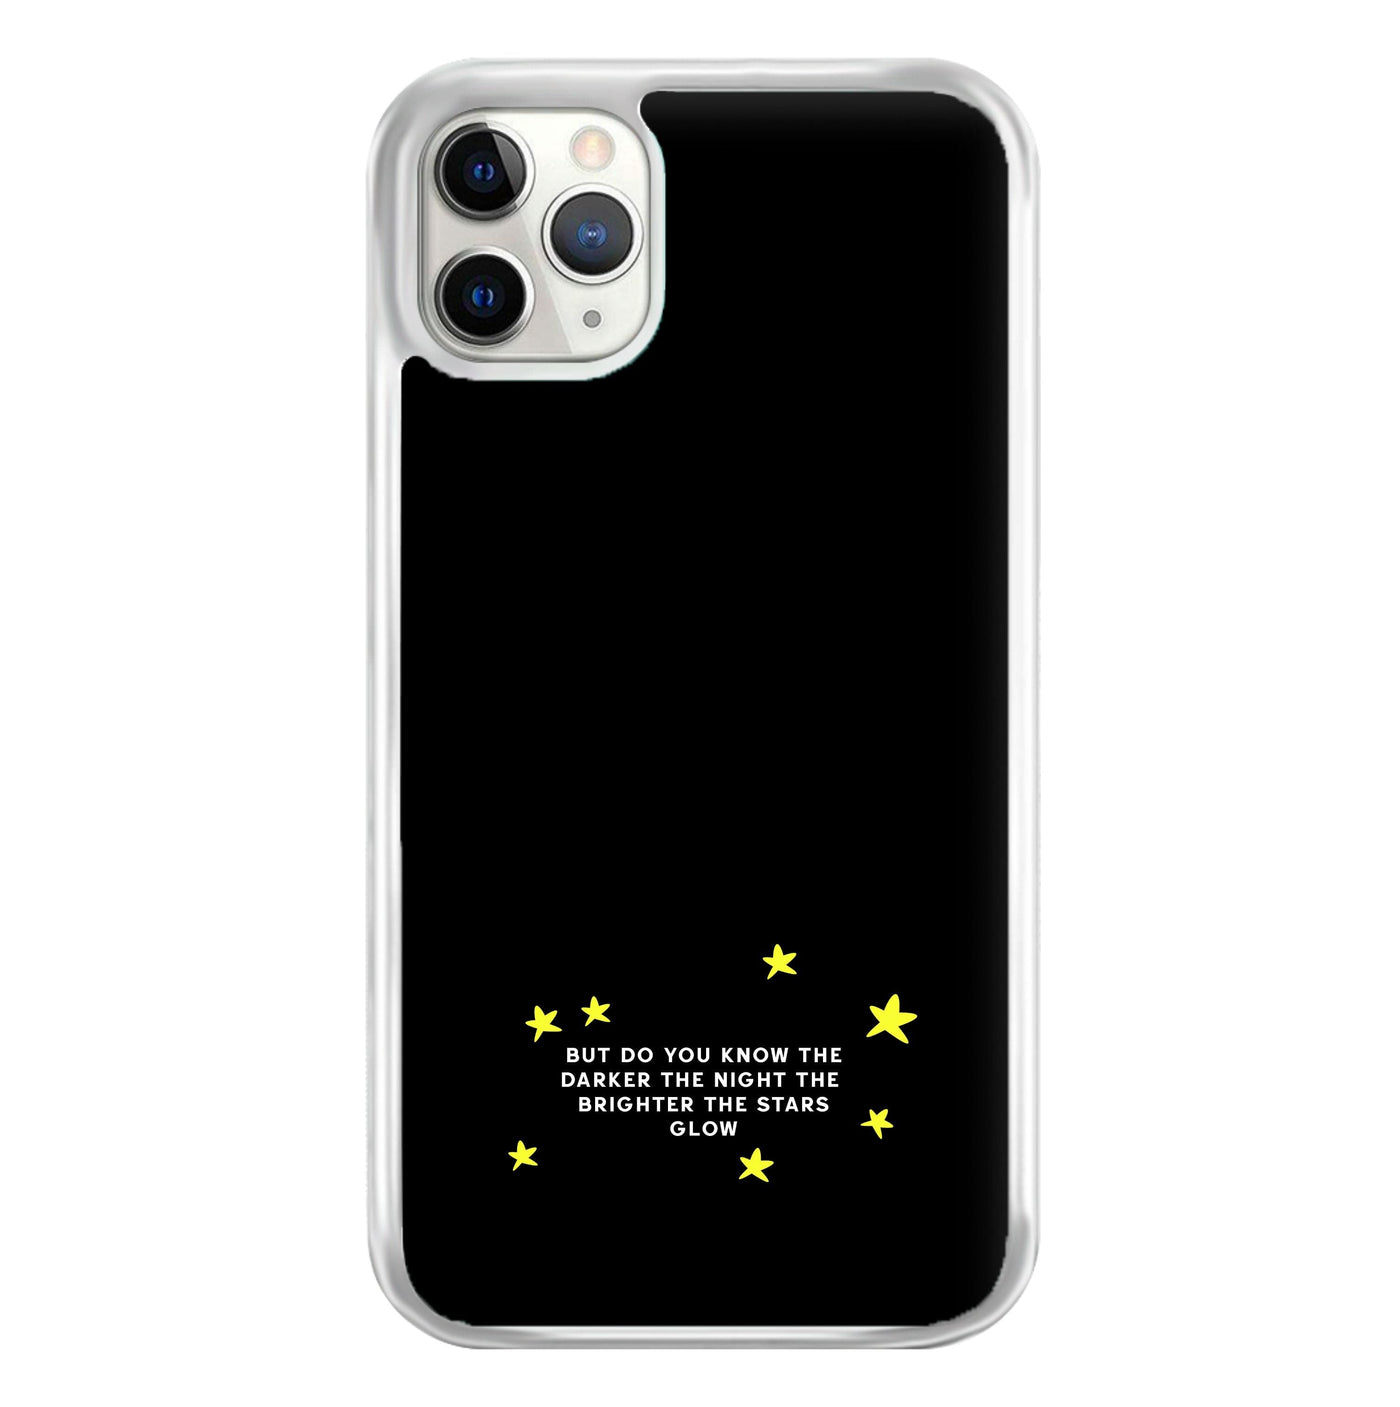 Brighter The Stars Glow - Katy Perry Phone Case